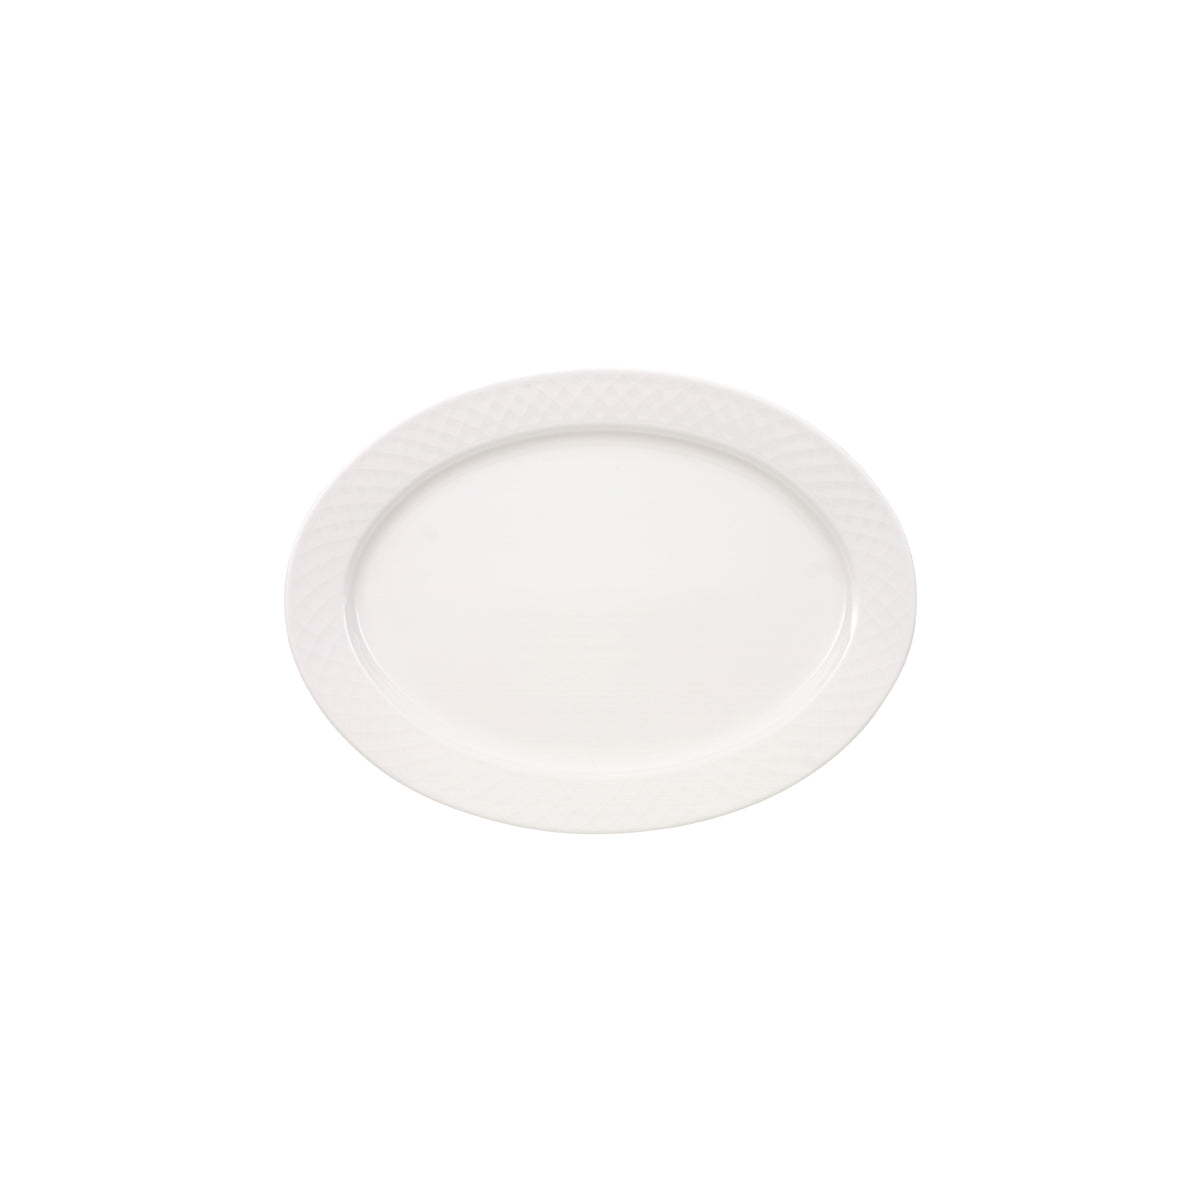 VB16-2238-2720 Villeroy And Boch Villeroy And Boch Bella White Oval Plate 320x240mm Tomkin Australia Hospitality Supplies